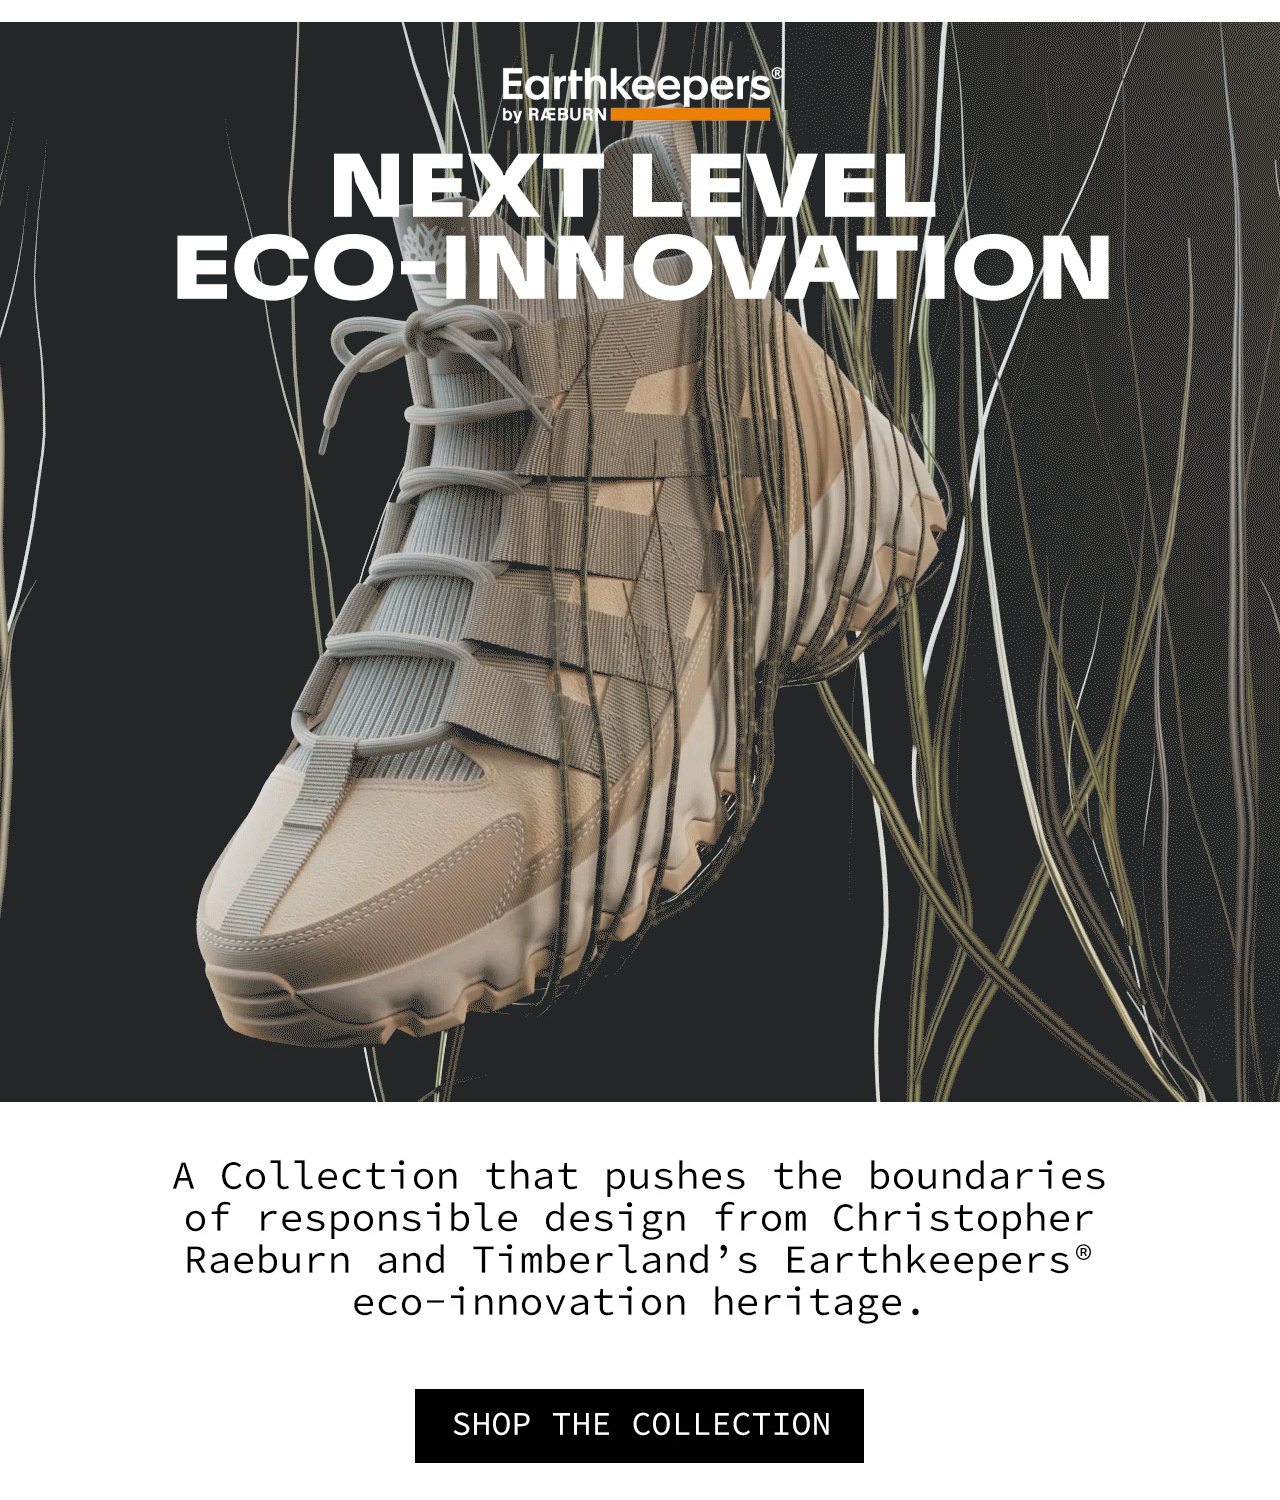 Earthkeepers by RAEBURN Next Level Eco-Innovation